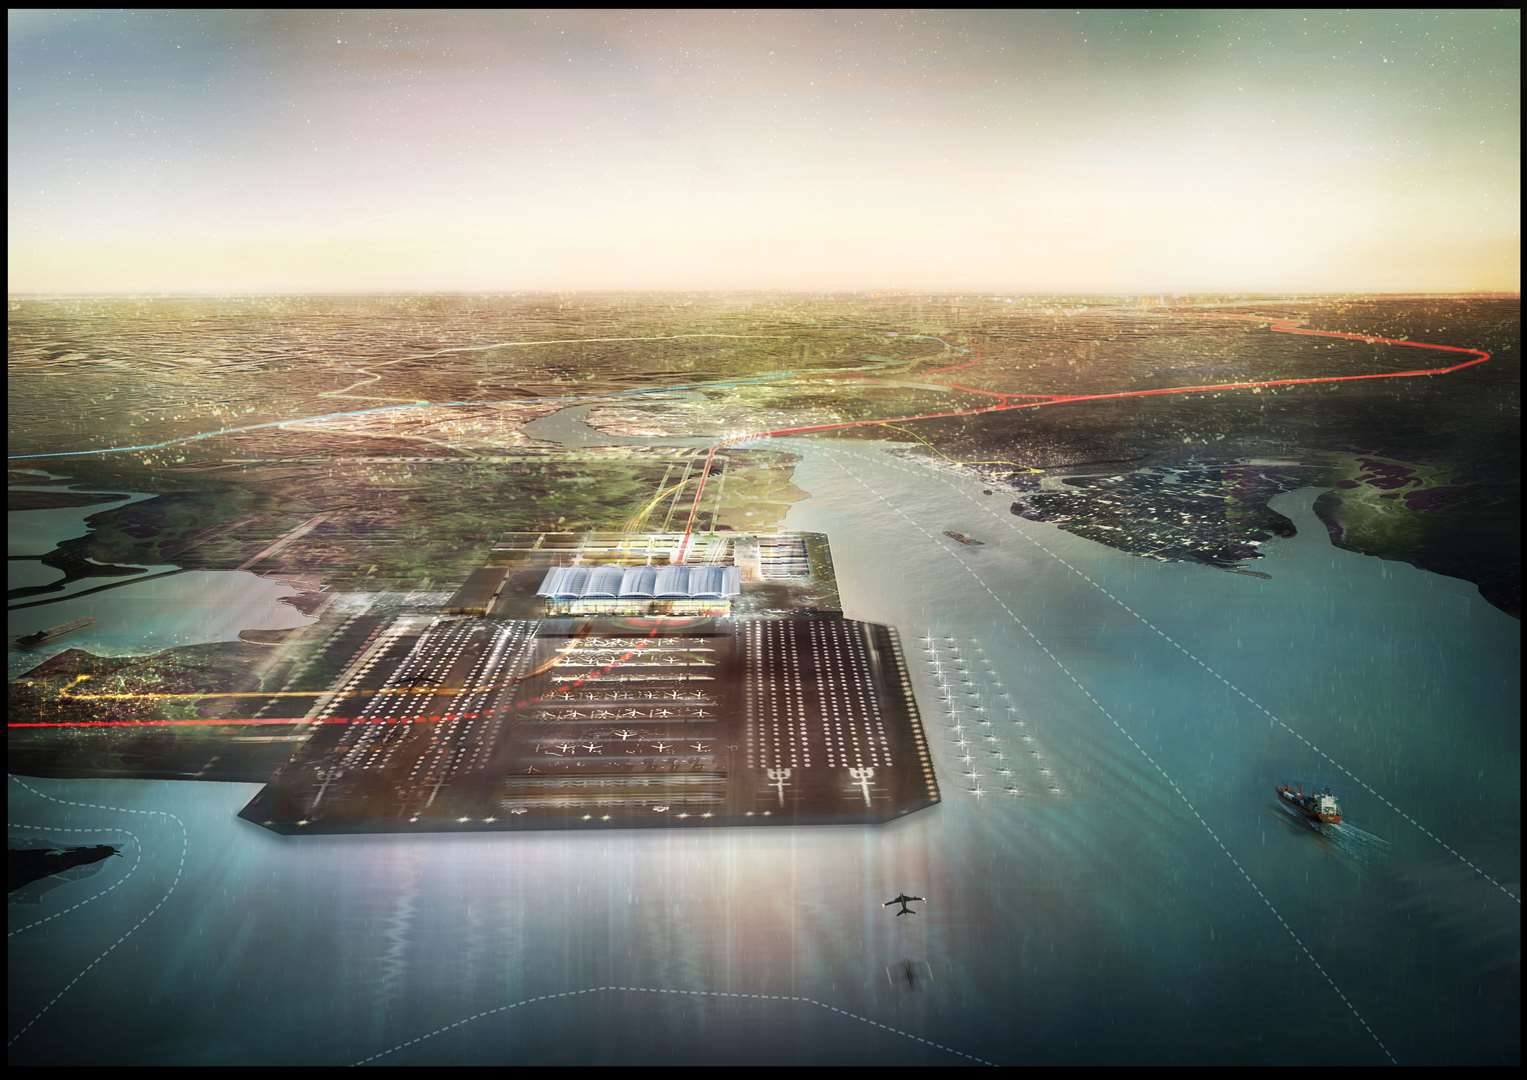 An artist’s impression of architect Lord Foster’s vision for a ‘Thames Hub’ in the Thames Estuary.